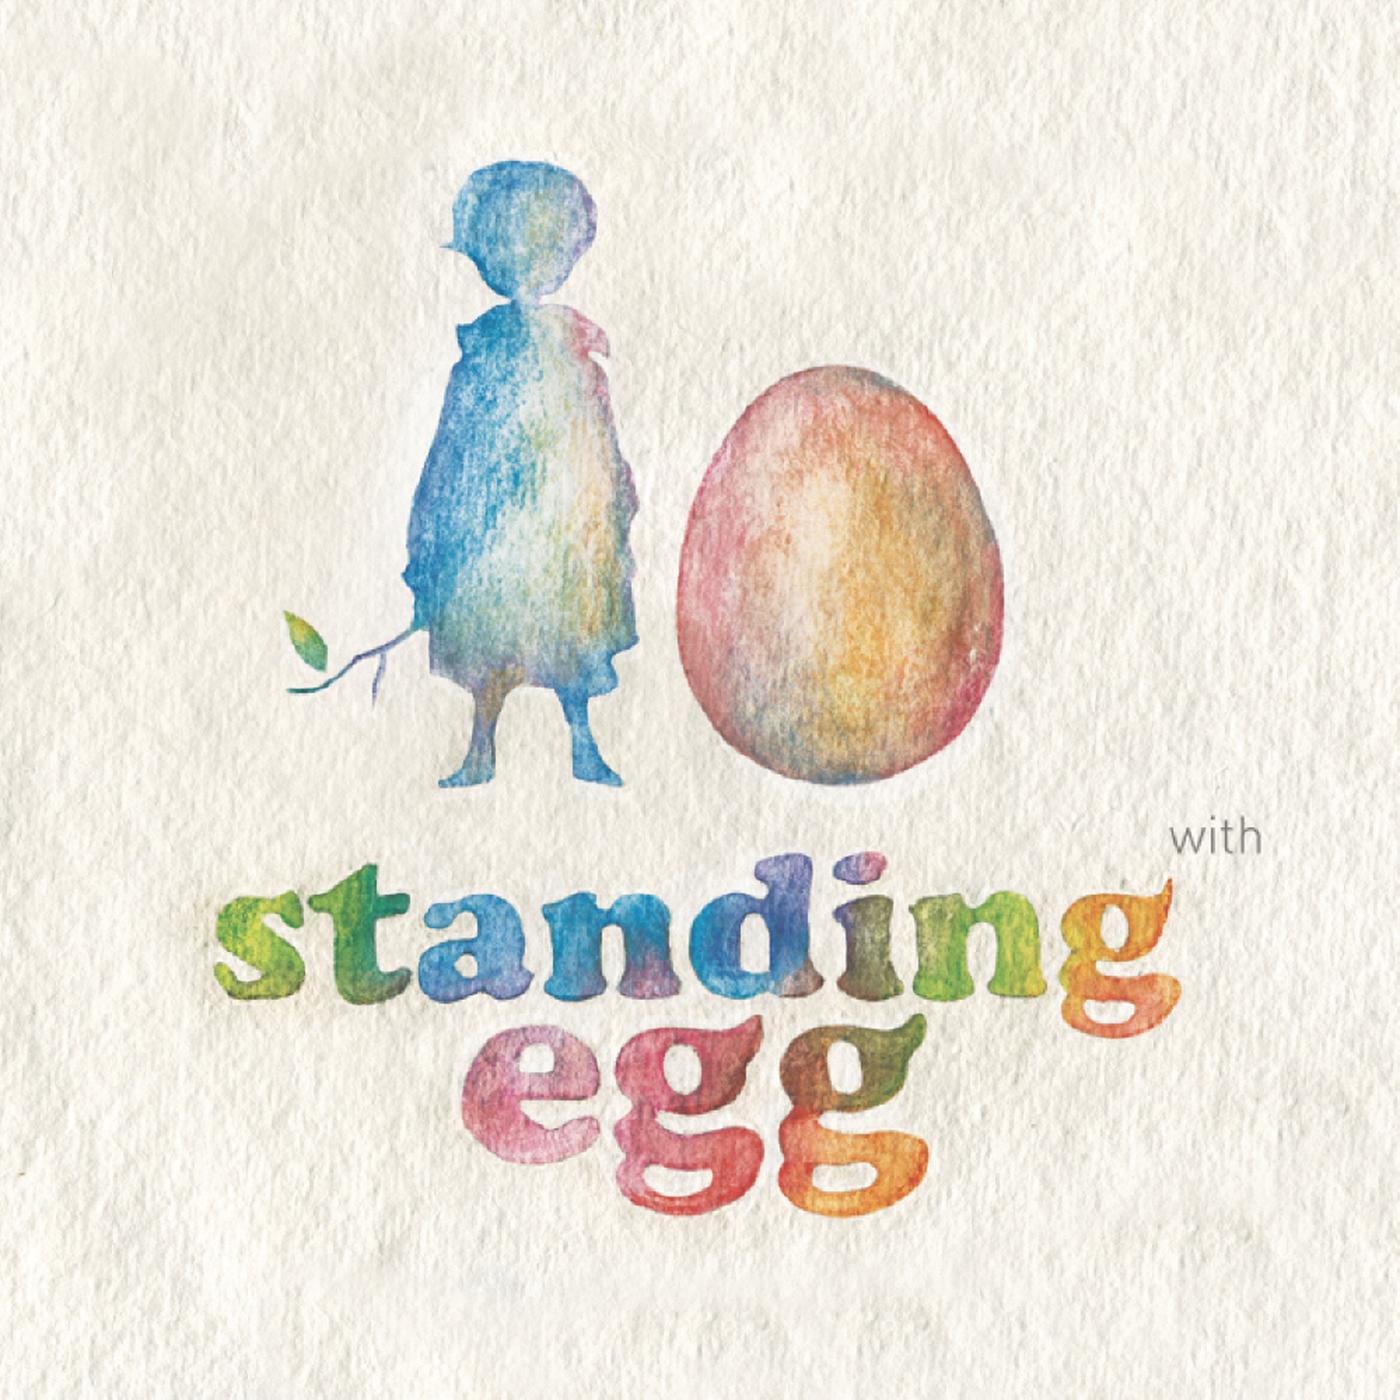 Standing Egg - 내일은 잊을거야 with J.ae